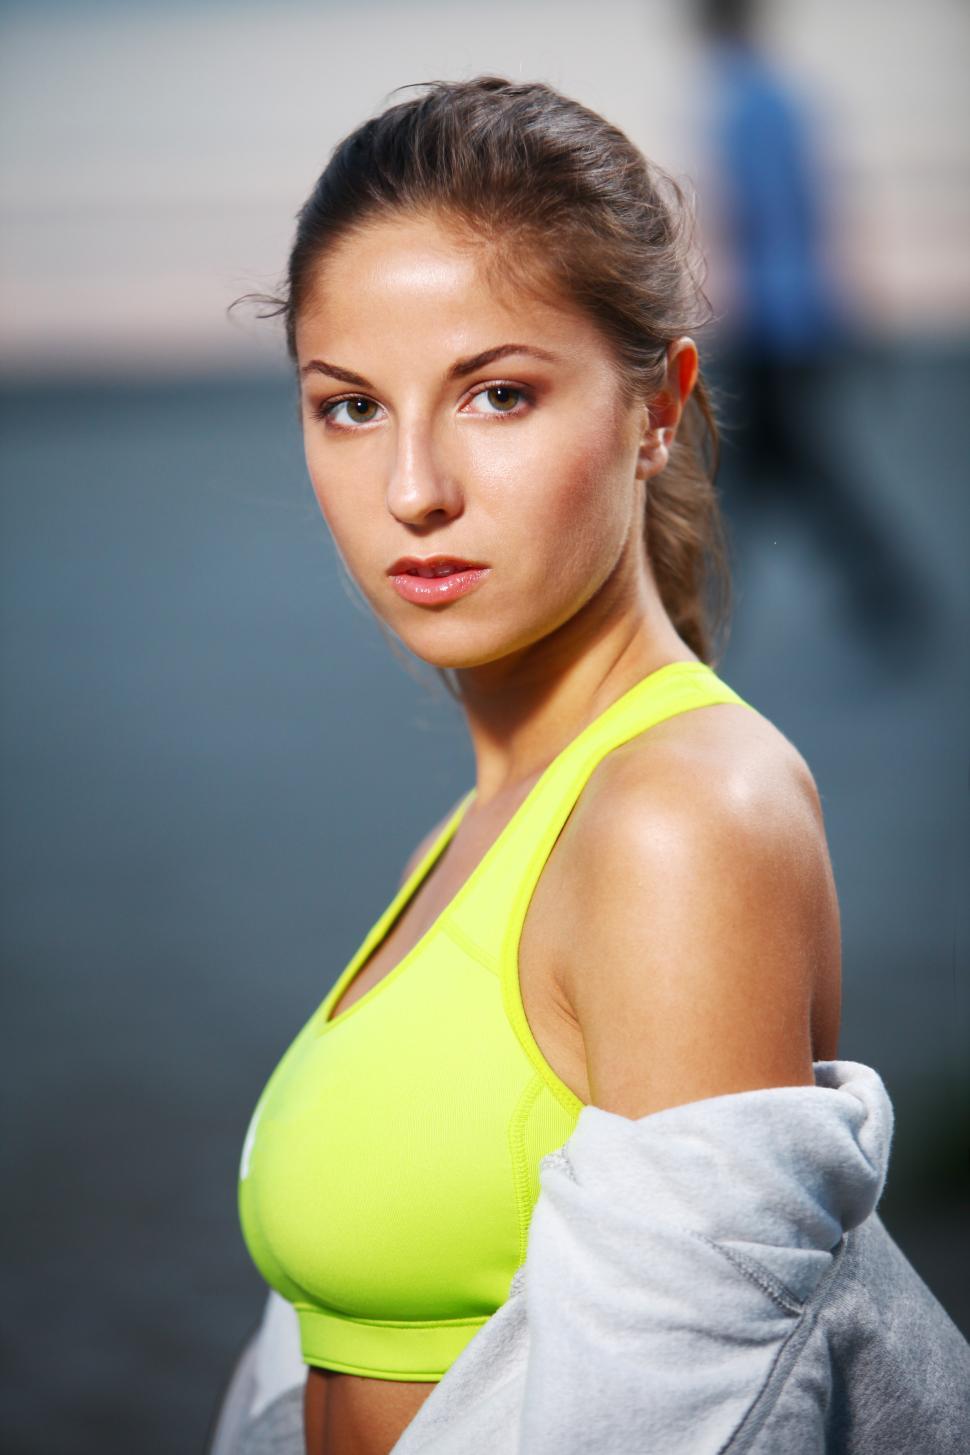 Free Image of Woman standing in workout gear 